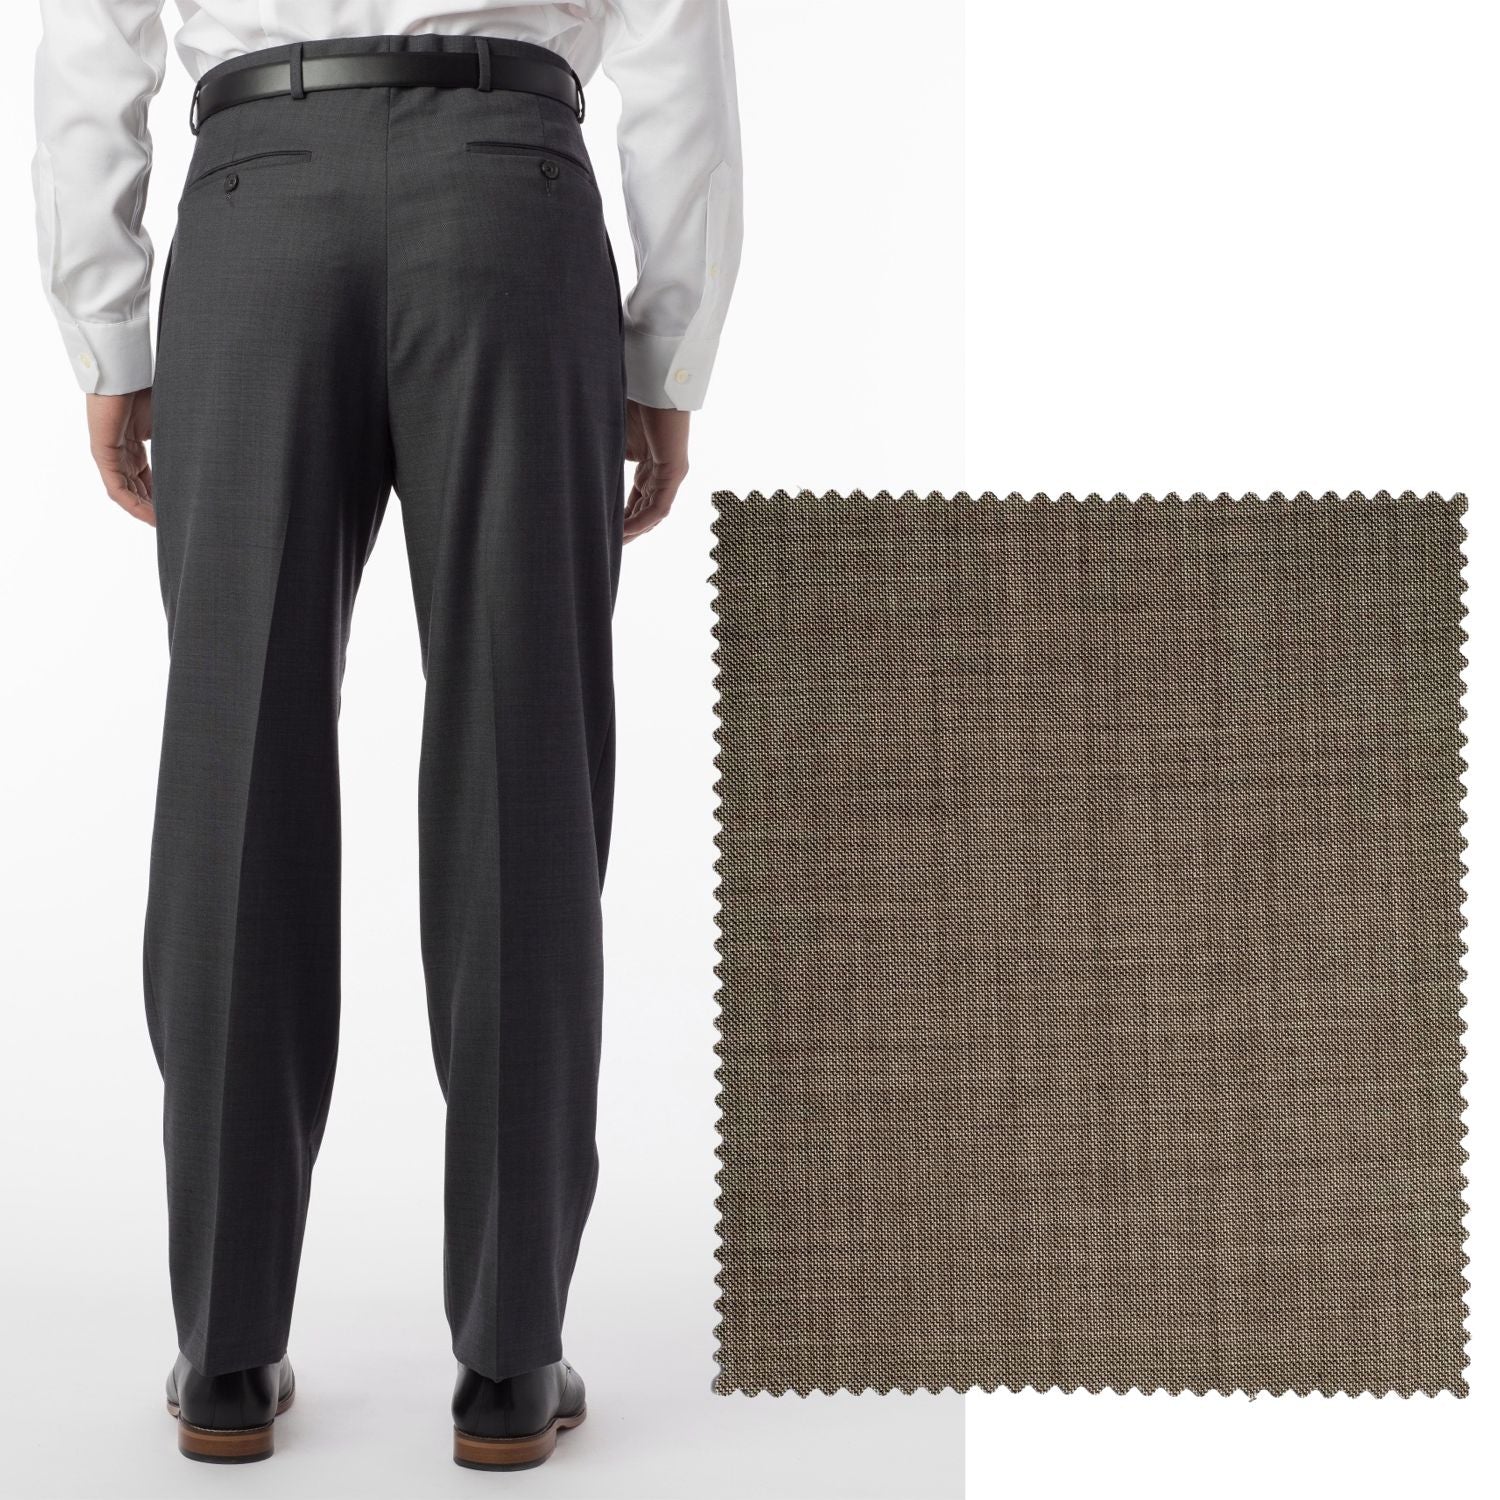 Sharkskin Super 120s Worsted Wool Comfort-EZE Trouser in Light Brown (Manchester Pleated Model) by Ballin